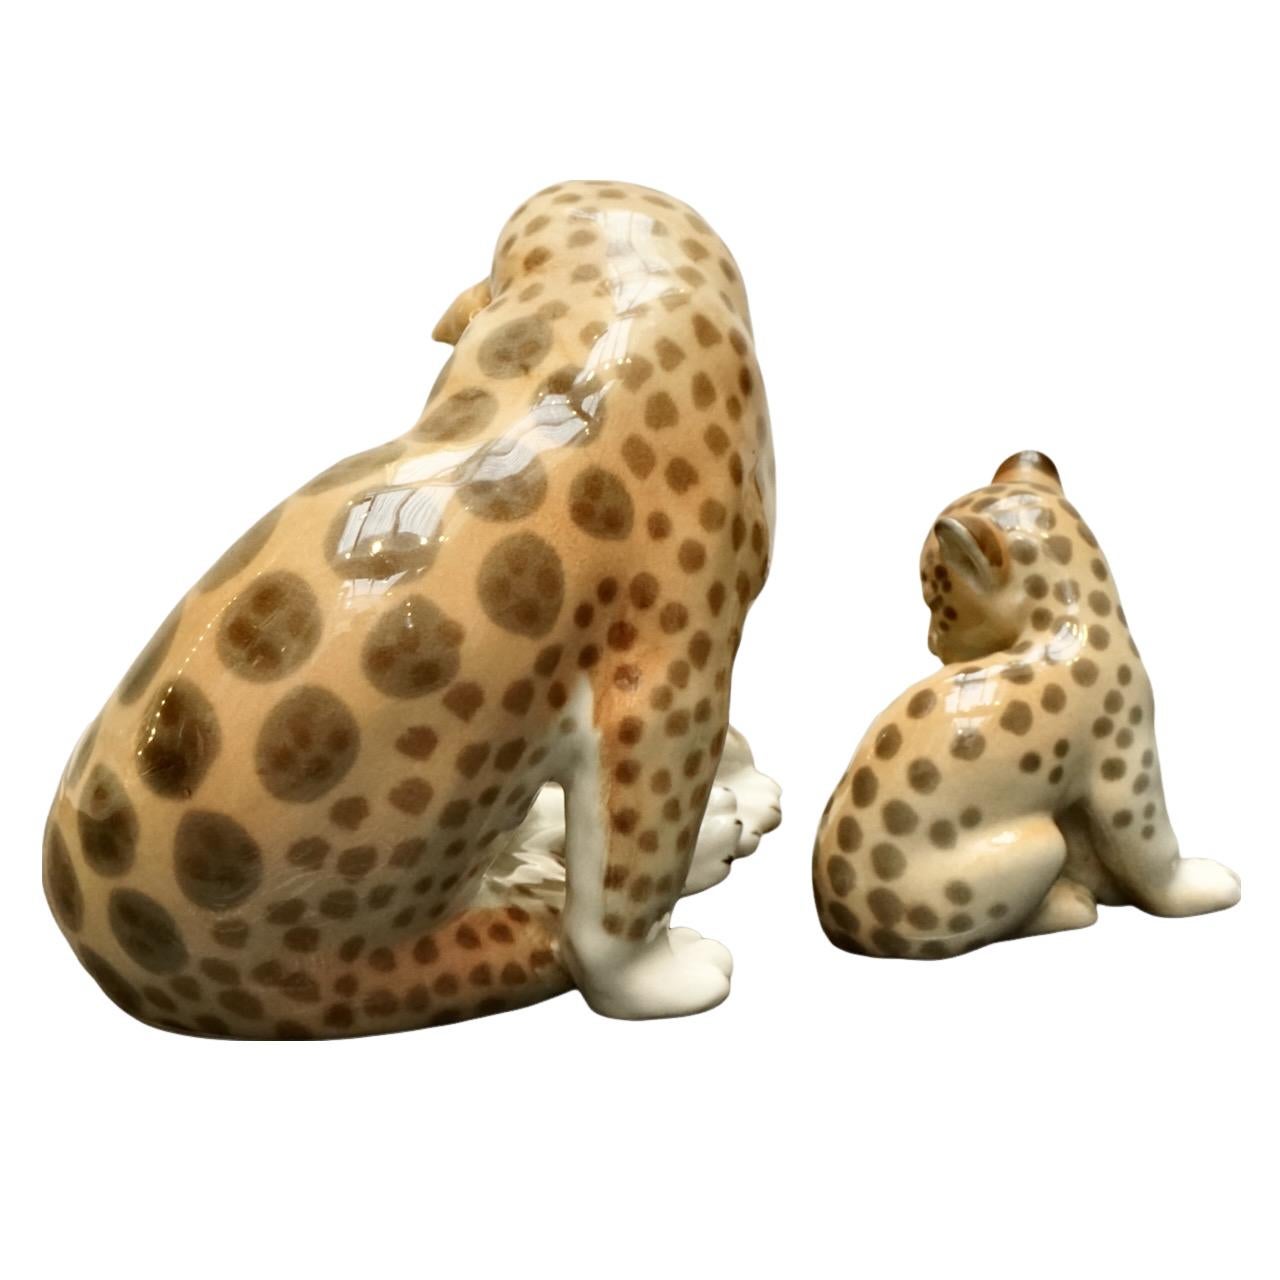 Hand-Painted Russian Lomonosov Porcelain Large Mother Cheetah and Cub Figurines Hand Painted For Sale